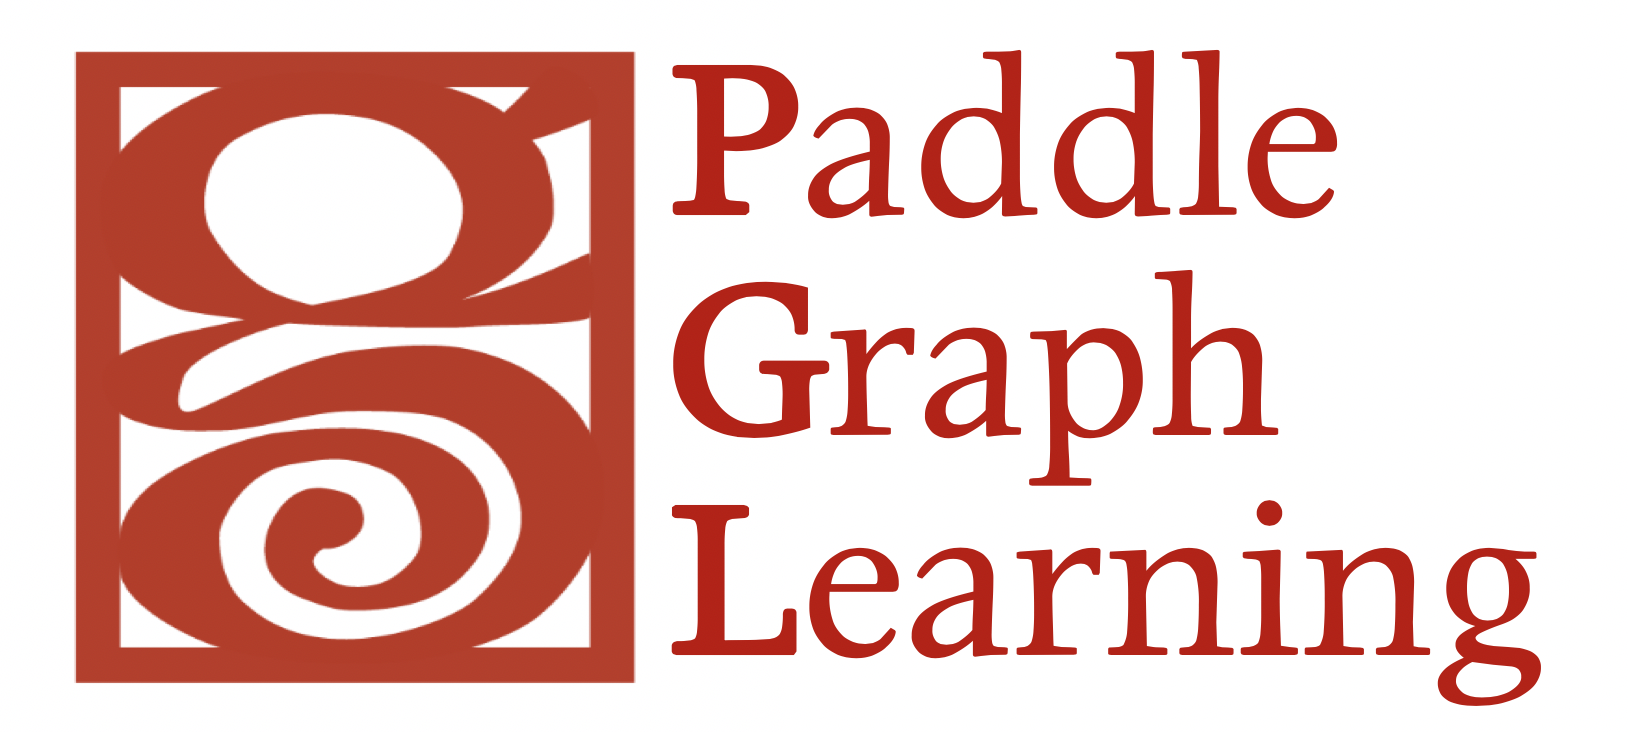 The logo of Paddle Graph Learning (PGL)